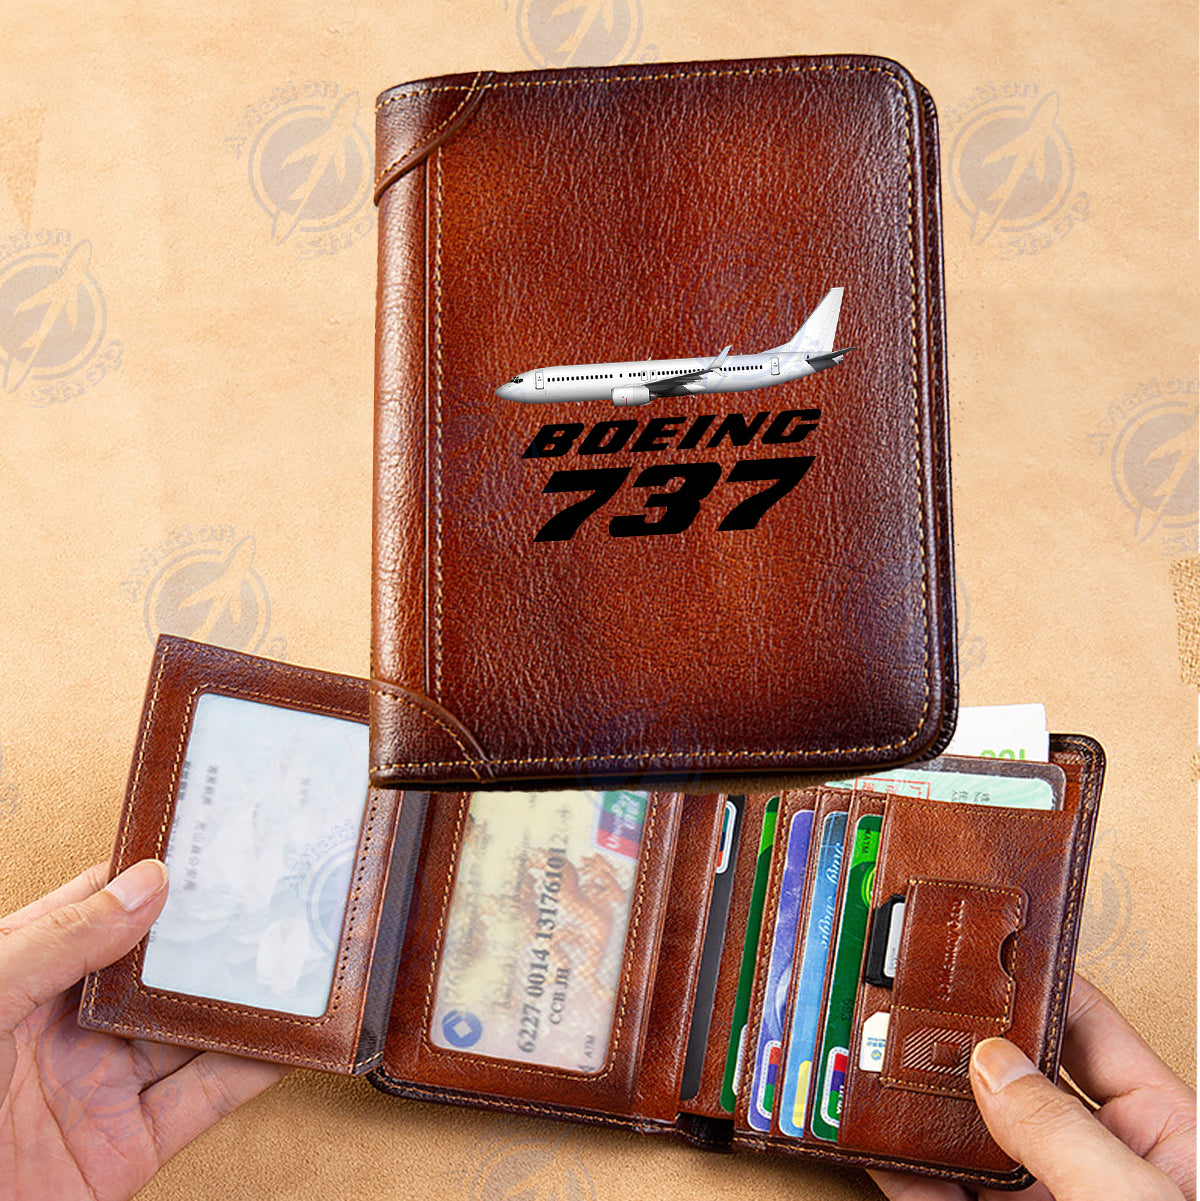 The Boeing 737 Designed Leather Wallets